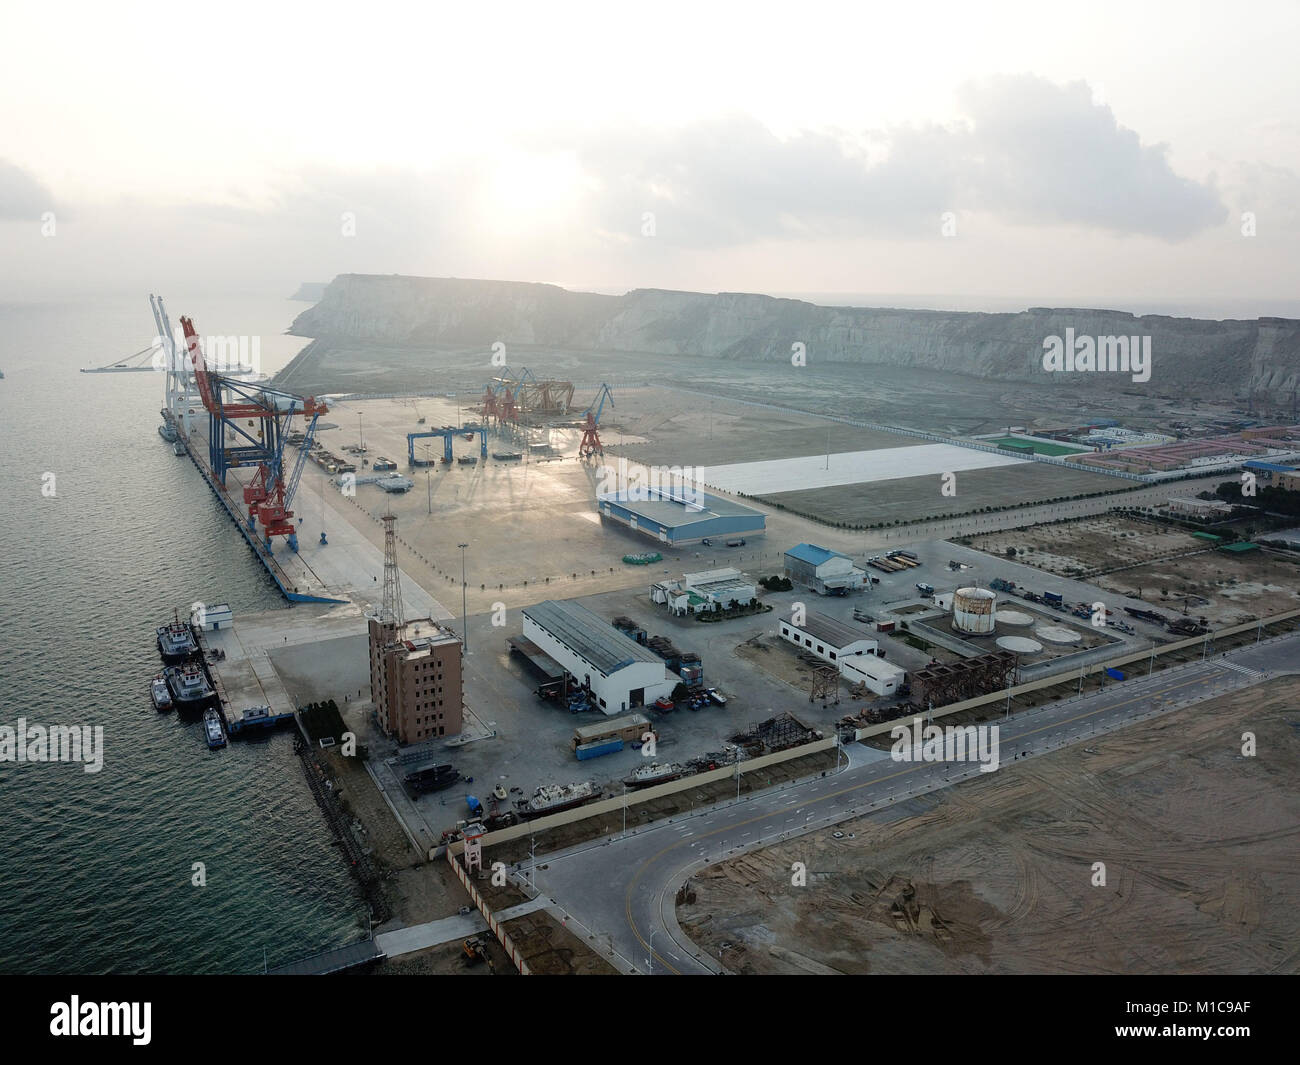 (180129) -- GWADAR, Jan. 29, 2018 (Xinhua) -- Photo taken on Jan. 29, 2018 shows a view of Gwadar port in southwest Pakistan's Gwadar. The first phase of Gwadar Port's Free Zone in southwestern Pakistan was inaugurated on Monday by Prime Minister Shahid Khaqan Abbasi, who commented that the free zone would help facilitate regional and global trade under the China-Pakistan Economic Corridor (CPEC). (Xinhua/Ahmad Kamal) (psw) Stock Photo